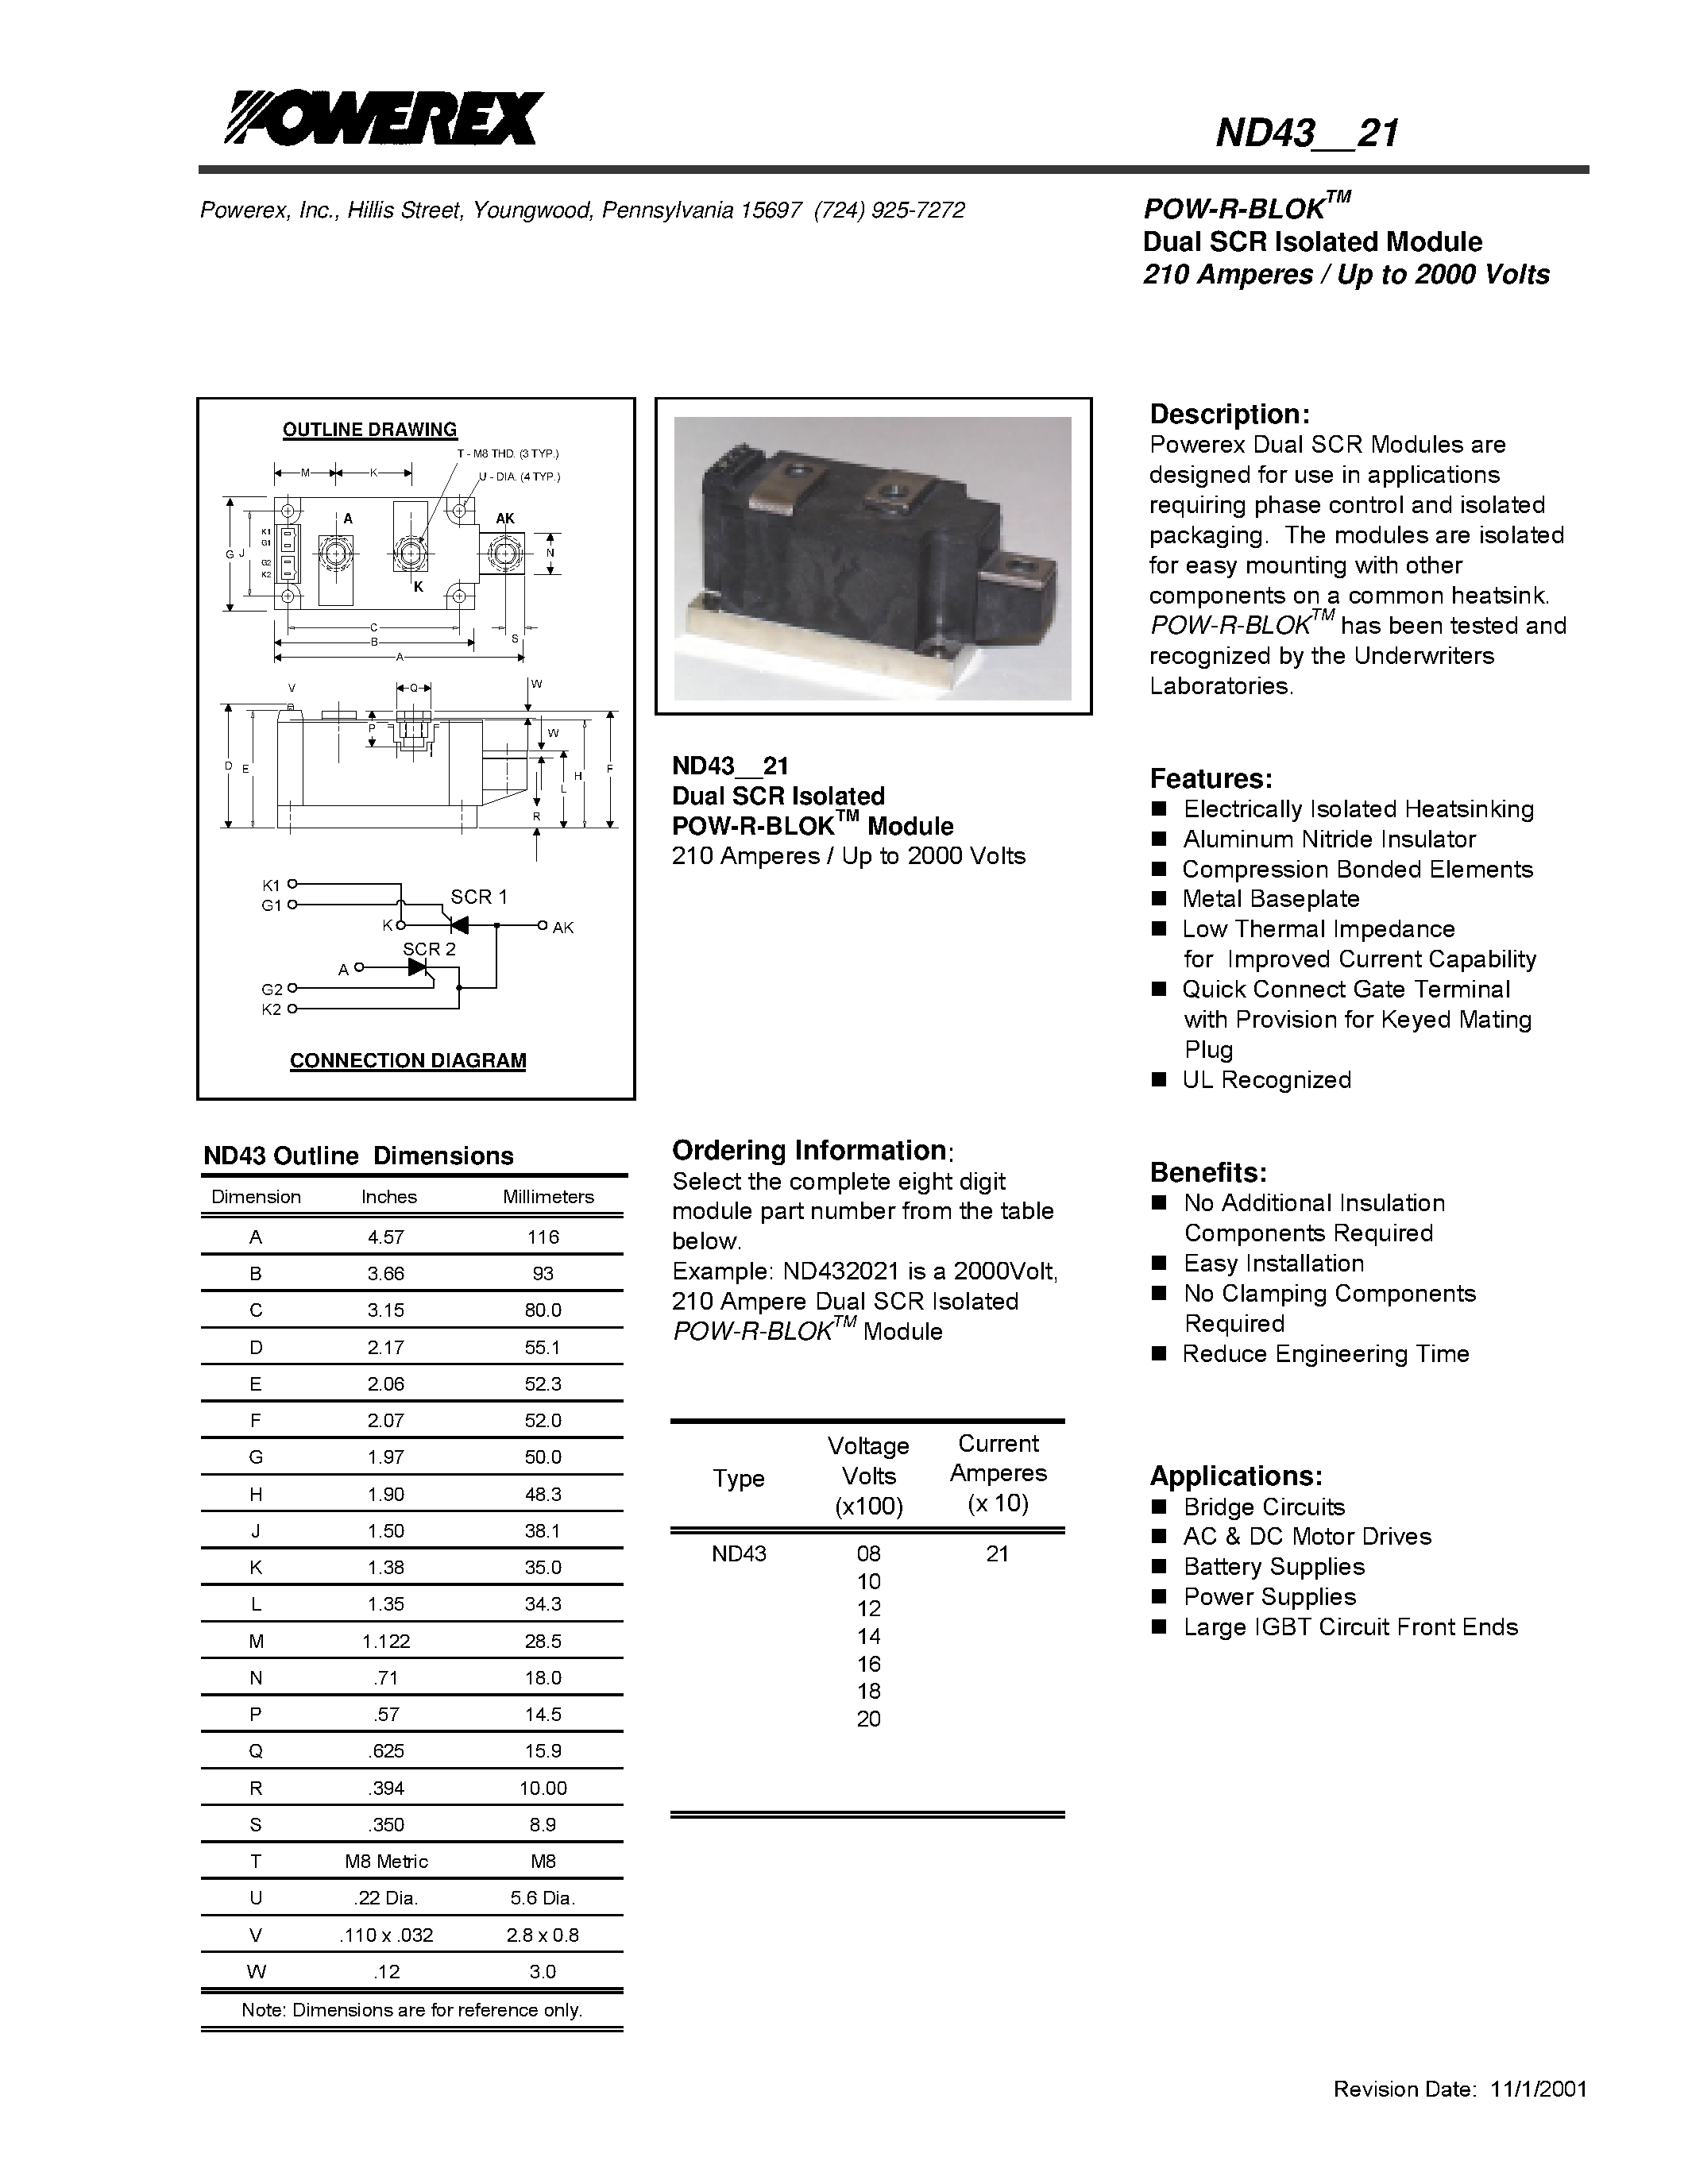 Datasheet ND430821 - POW-R-BLOK Dual SCR Isolated Module (210 Amperes / Up to 2000 Volts) page 1